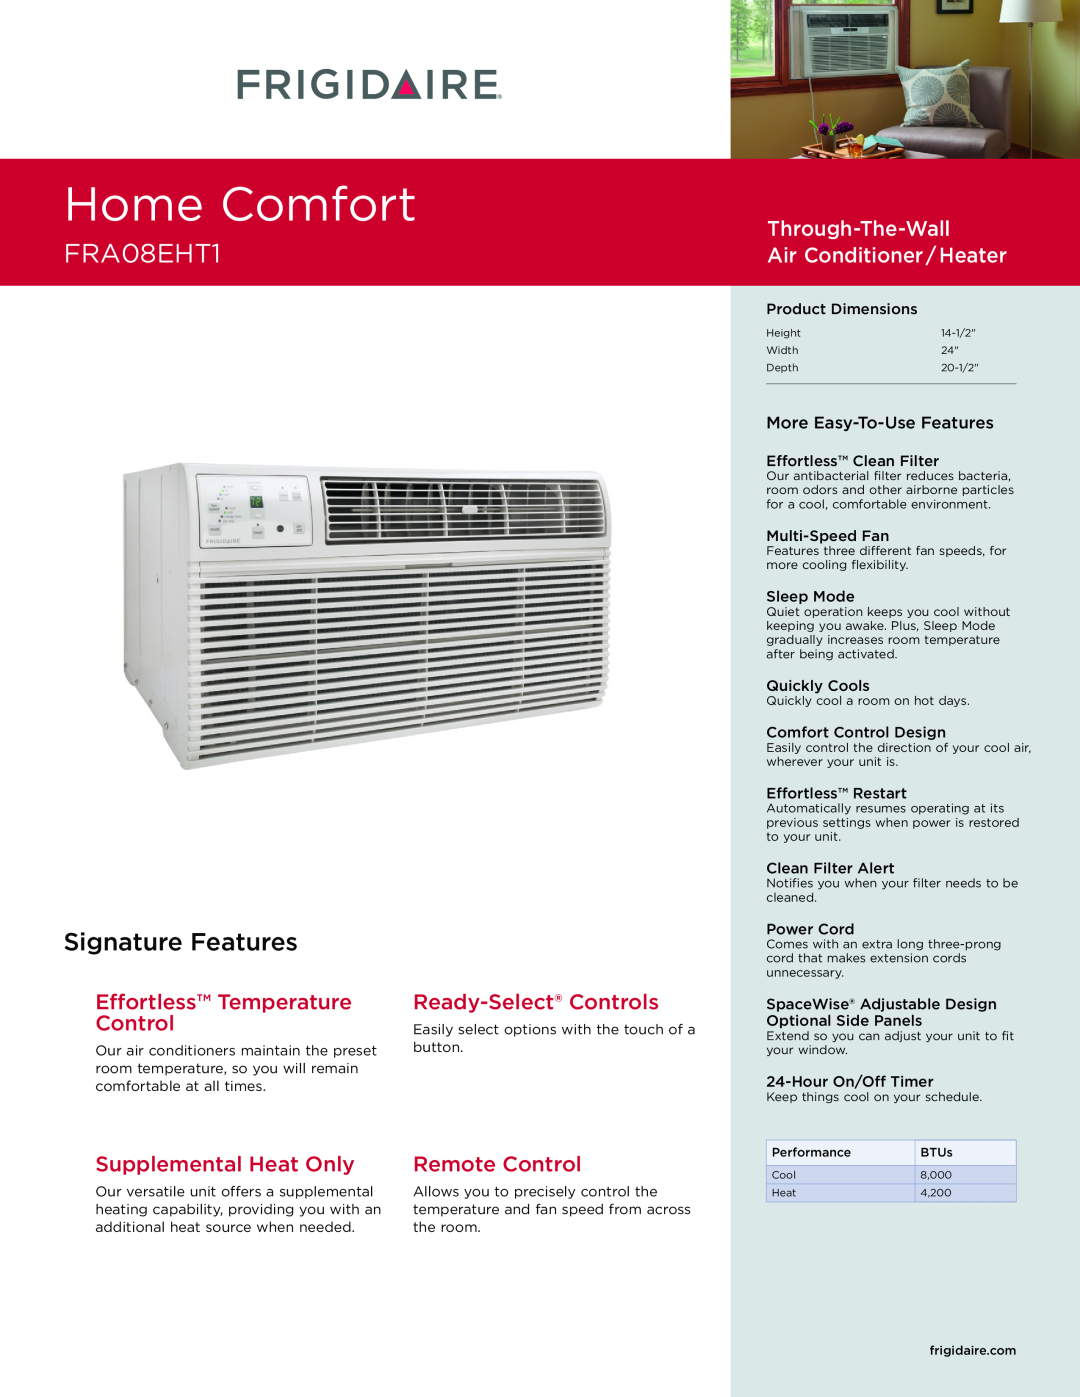 Frigidaire FRA08EHTI dimensions Home Comfort, FRA08EHT1, Signature Features, Through-The-Wall Air Conditioner / Heater 